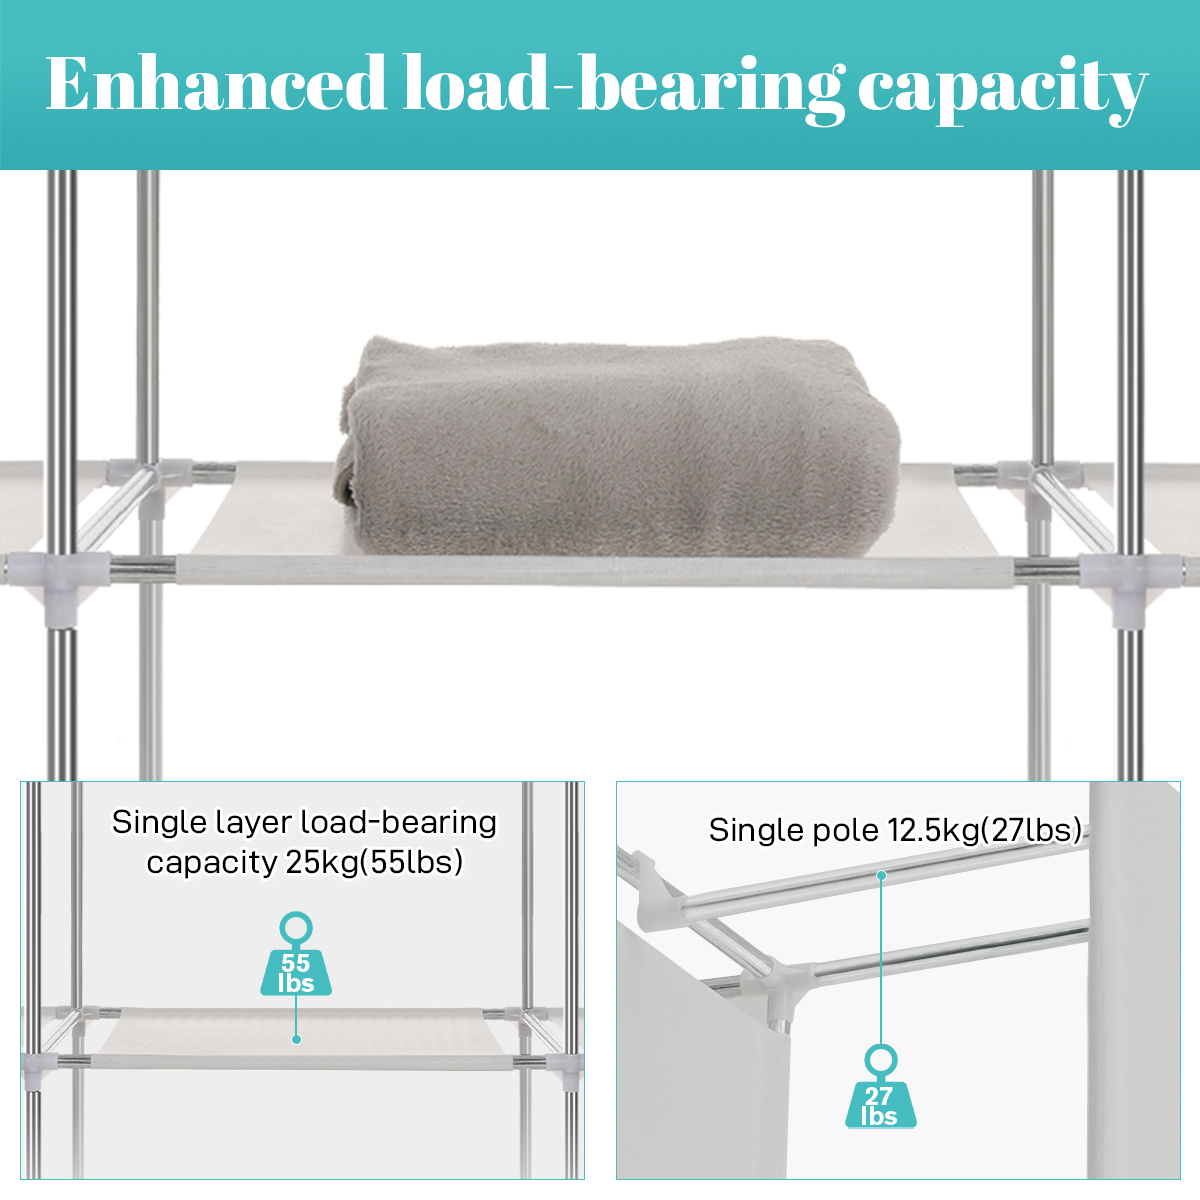 Portable Closet Storage Organizer Clothes Wardrobe Shoe Clothing Rack Shelf Dustproof Non-woven Fabric, Quick and Easy to Assemble - image 4 of 11